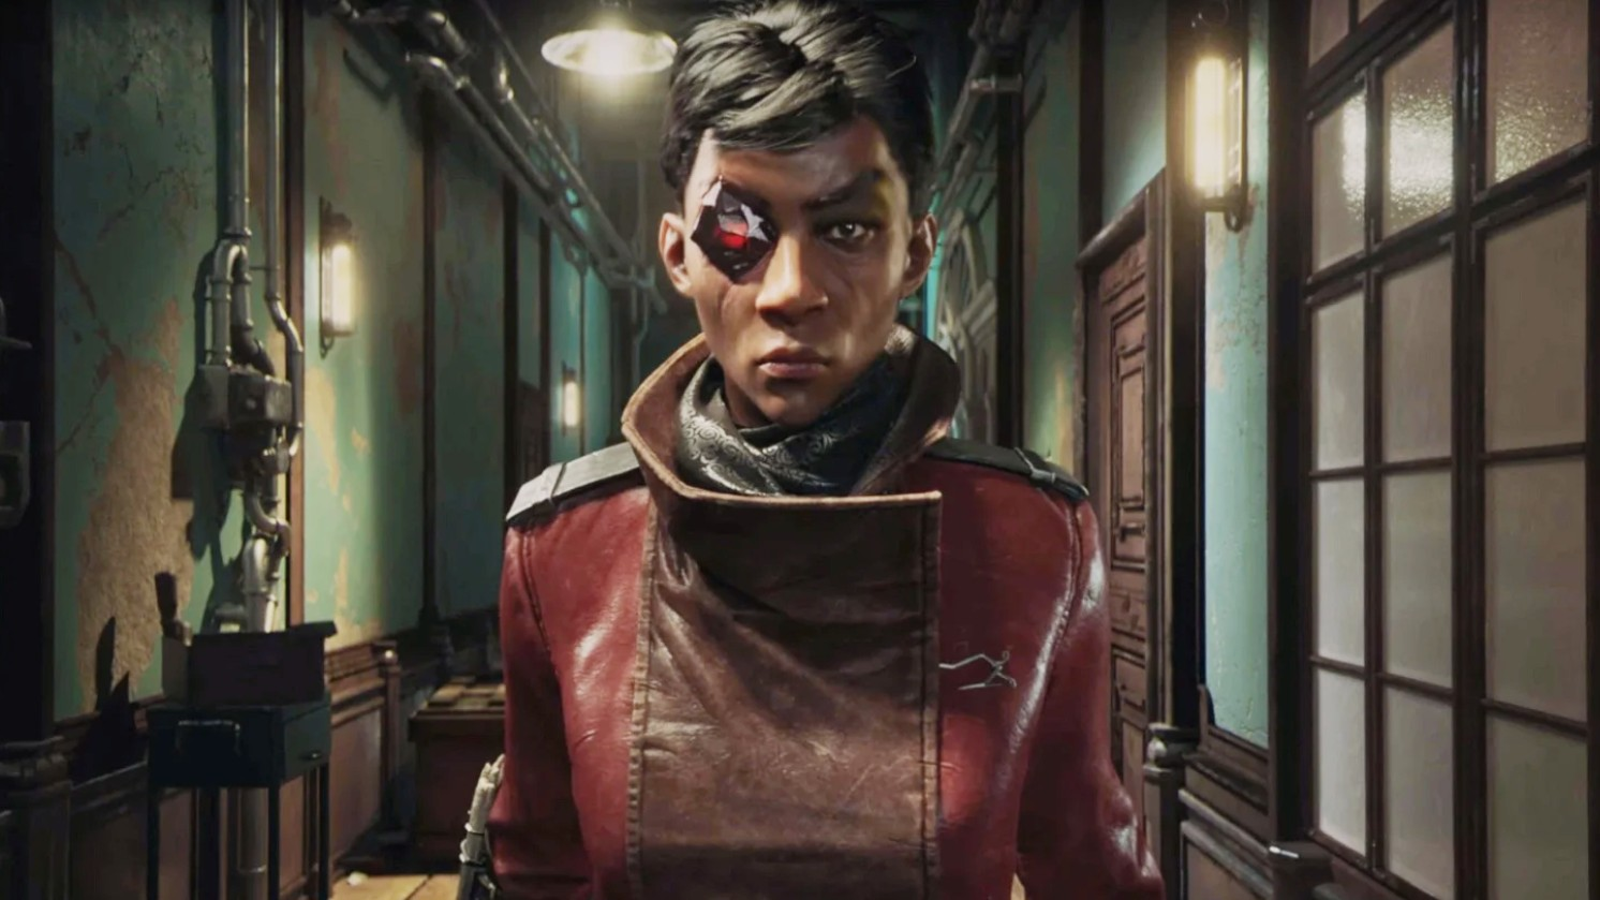 Grátis Epic Games: City of Gangsters e Dishonored: Death of the Outsider